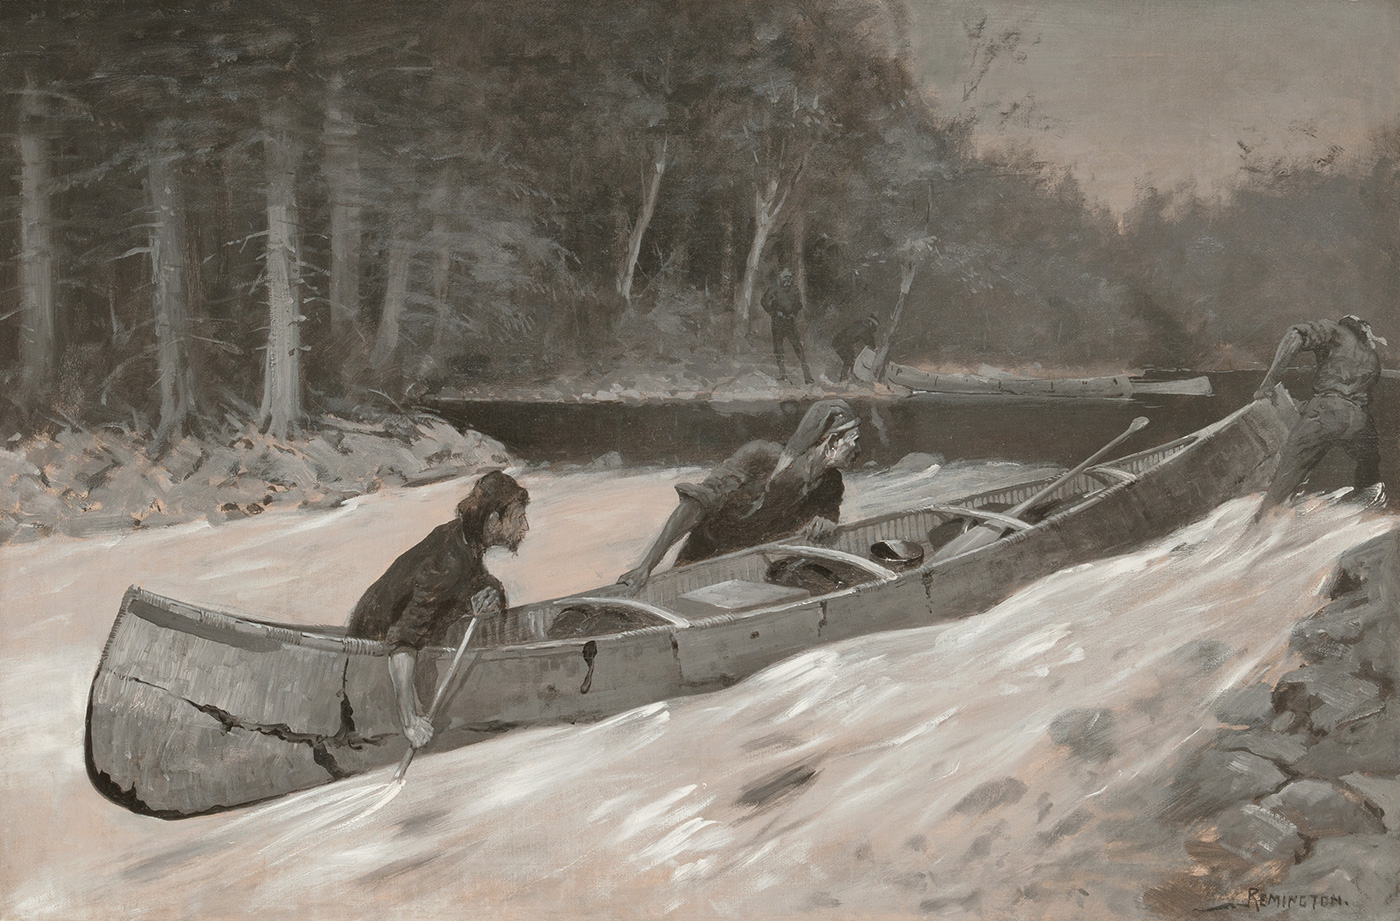 Three men row and pull a canoe in a moving stream.